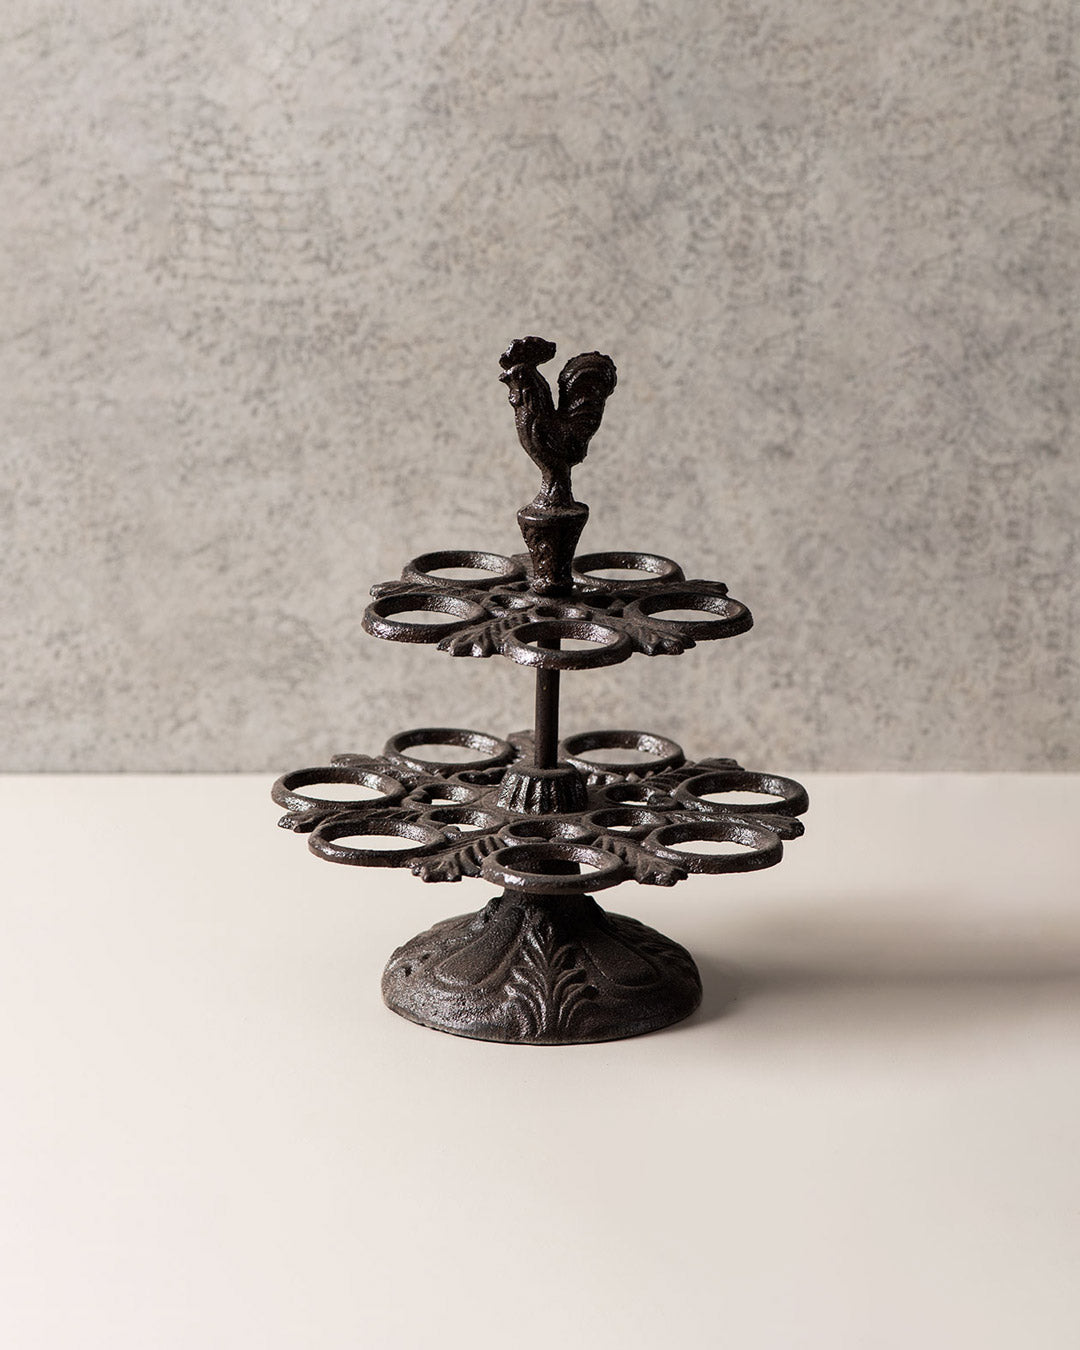 Vintage cast iron egg display stand featuring a rooster figure and multiple egg holders.